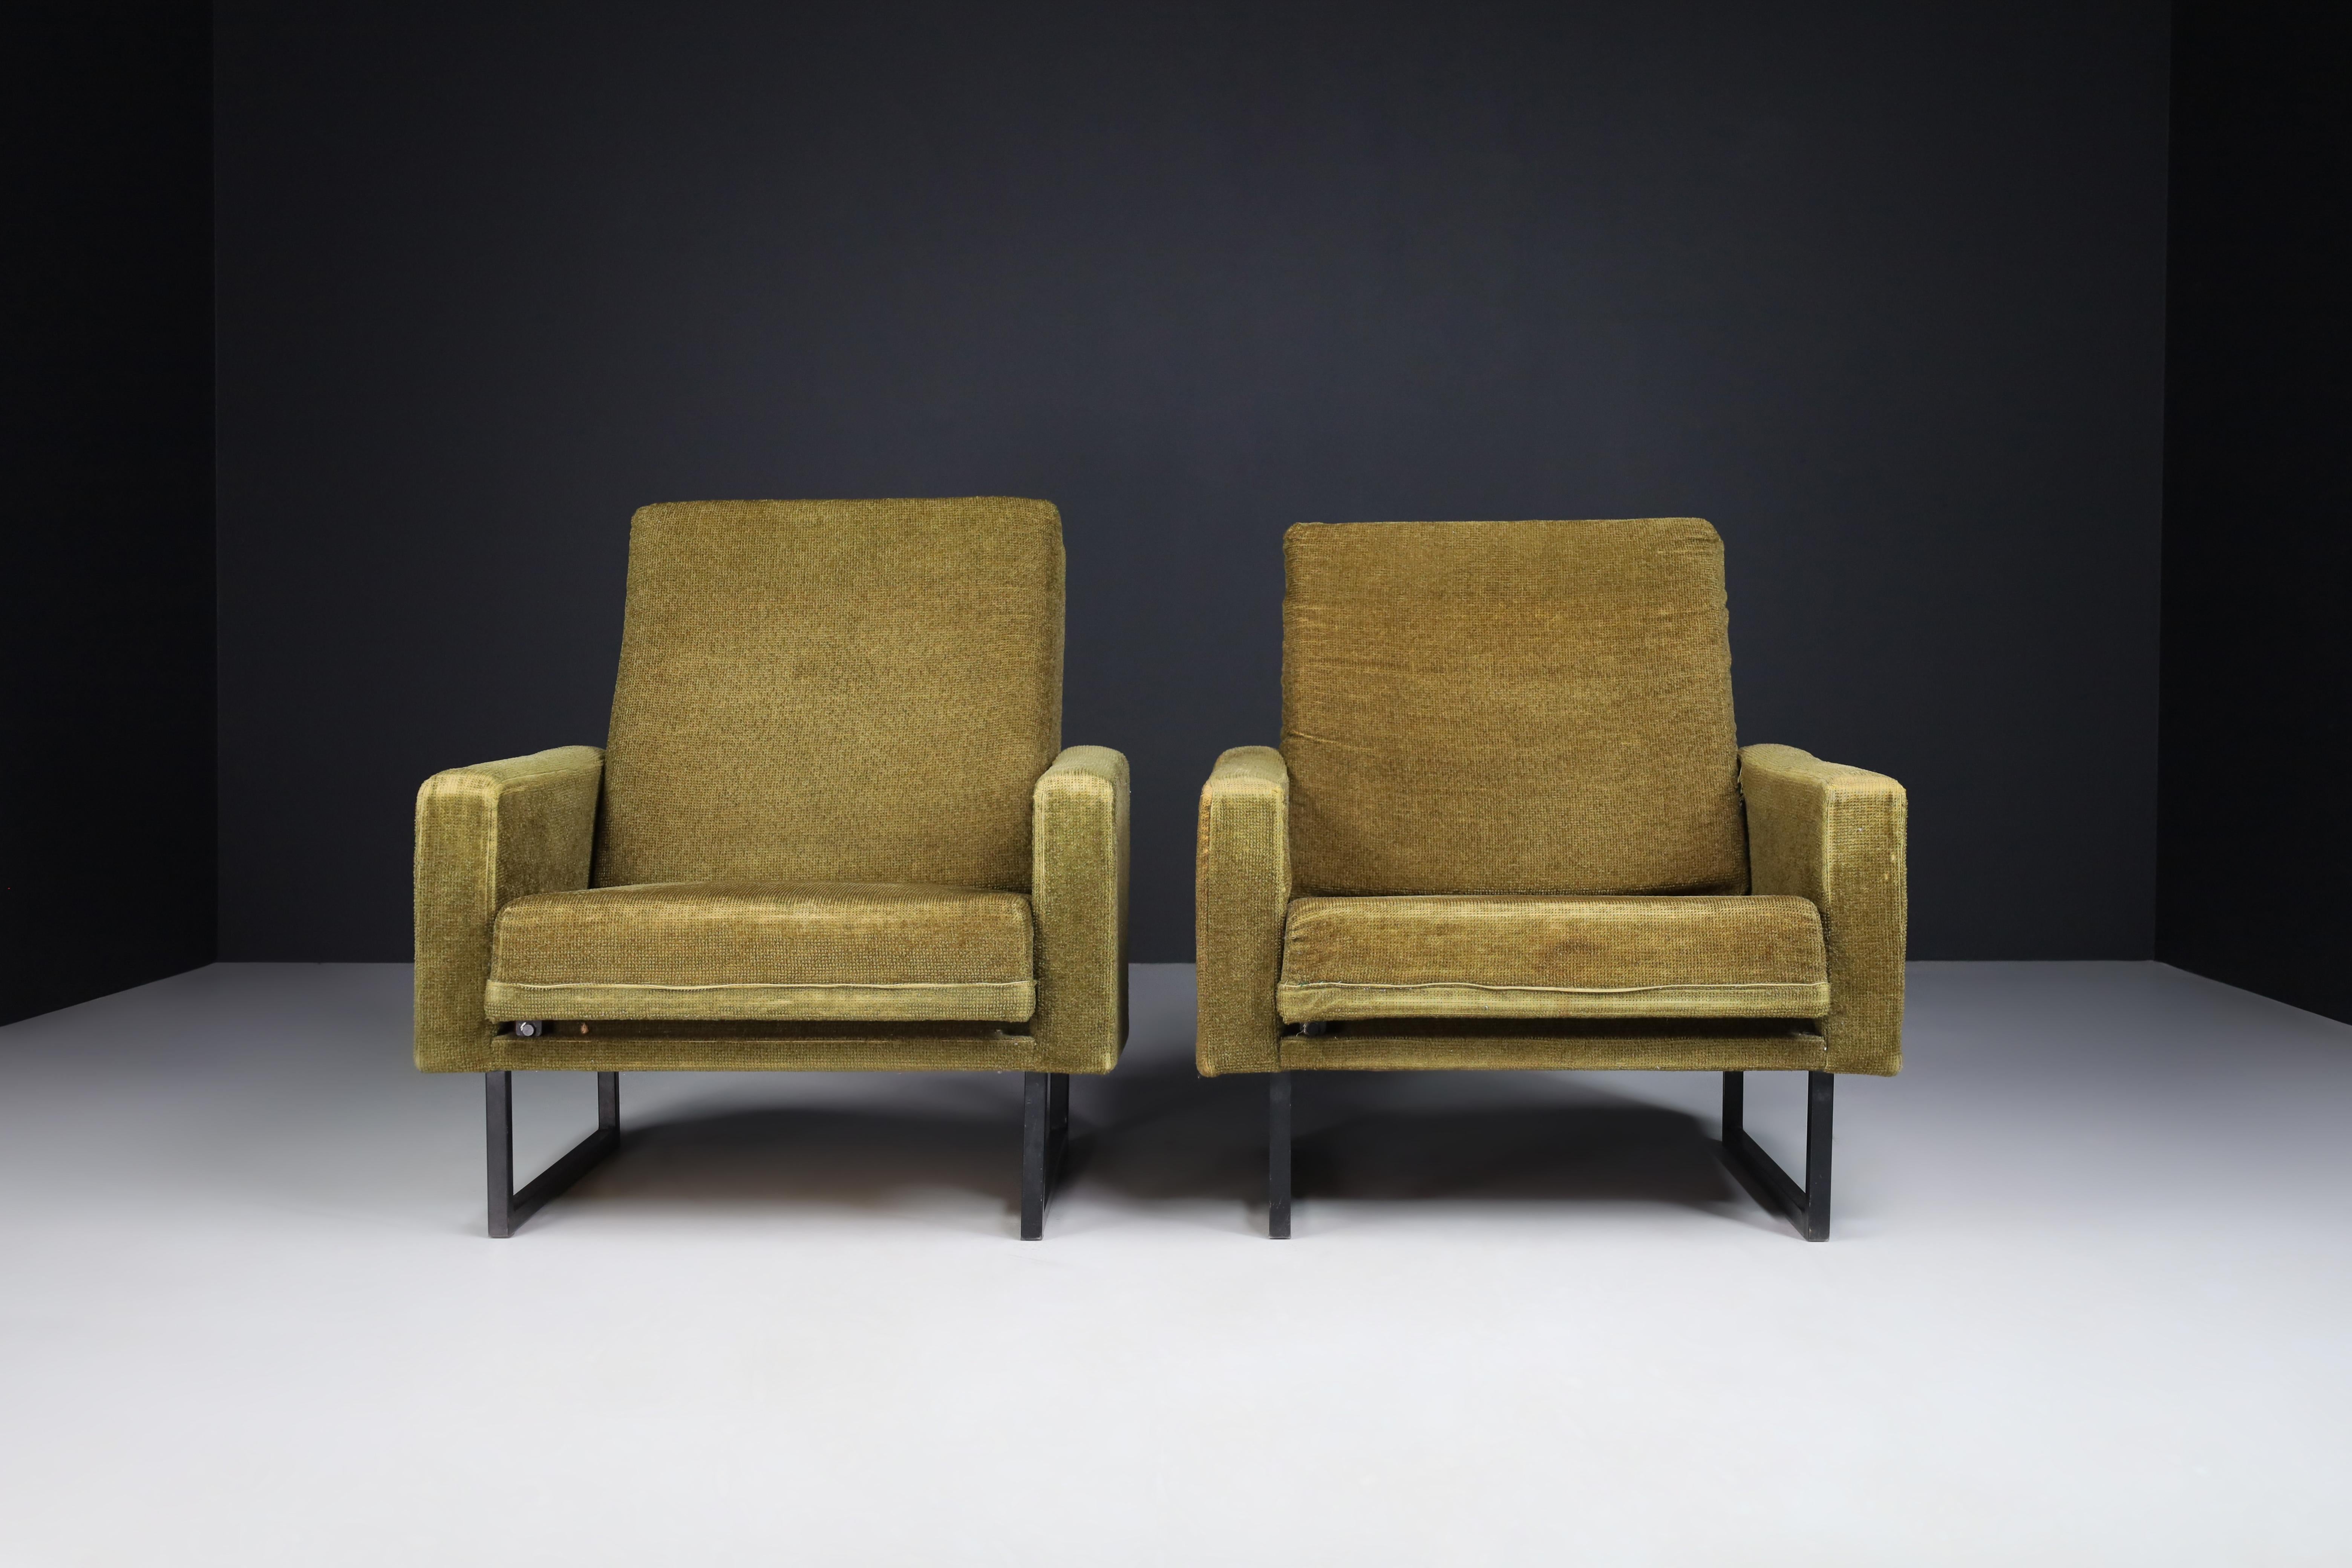 French Pair Lounge Chairs by René Jean Caillette for Steiner in Original Fabric, 1963 For Sale